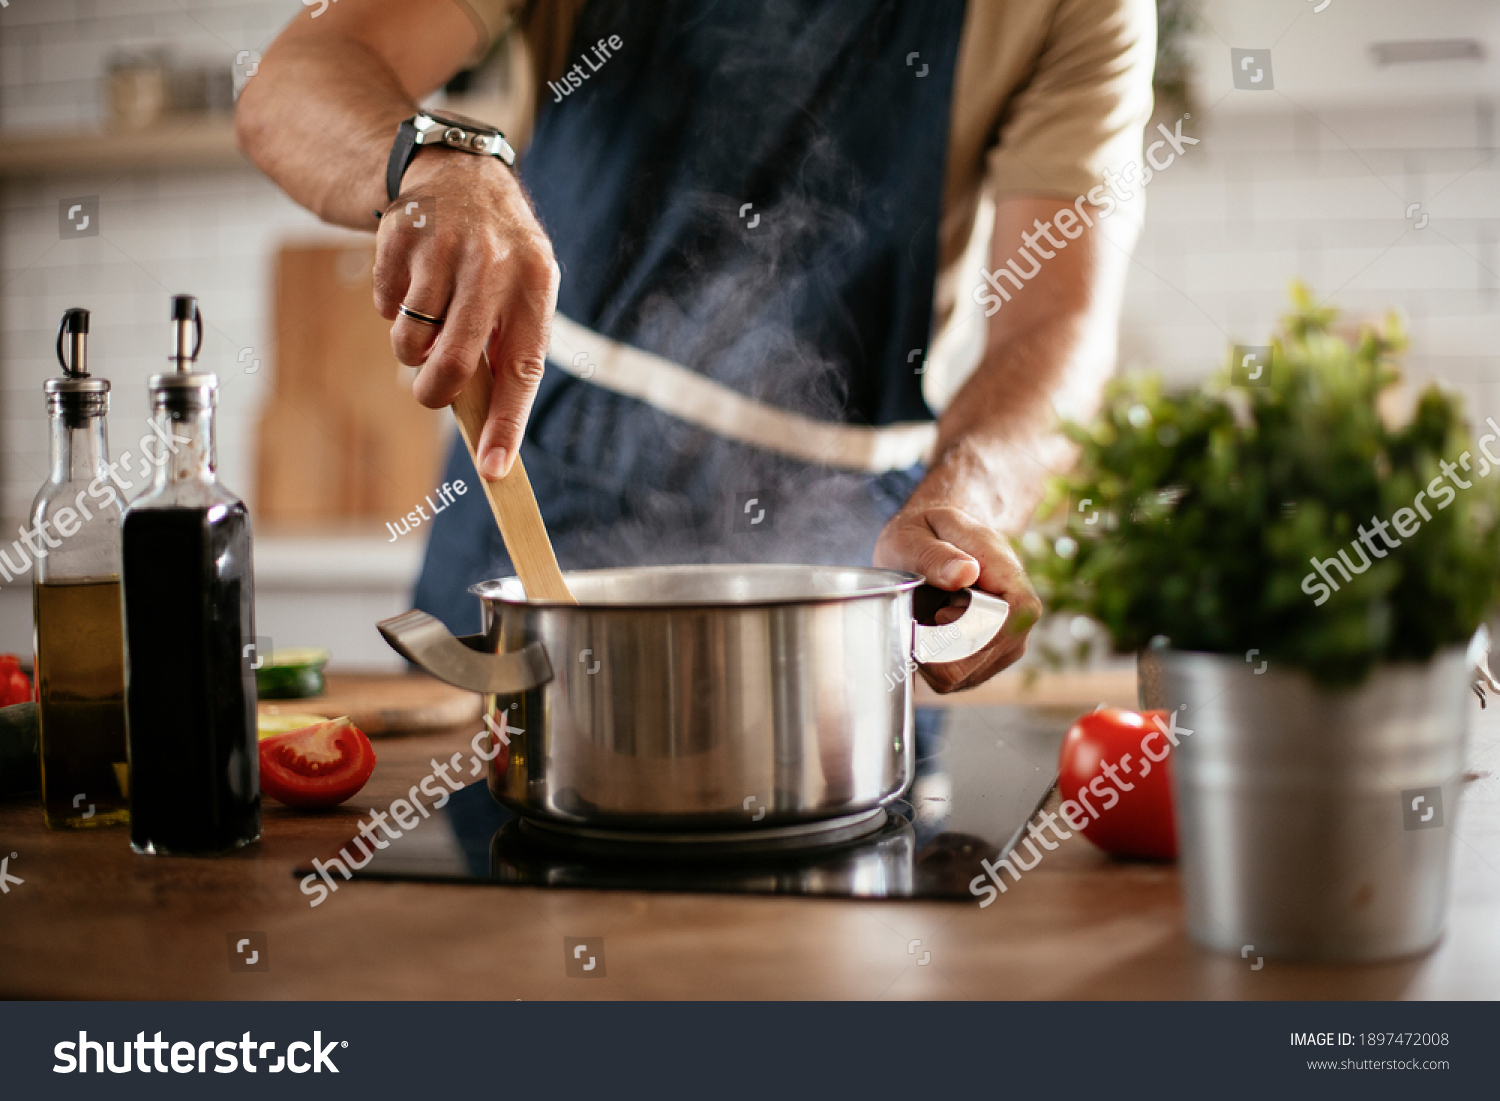 Young man cooking lunch at home. Handsome man preparing delicious food.  #1897472008